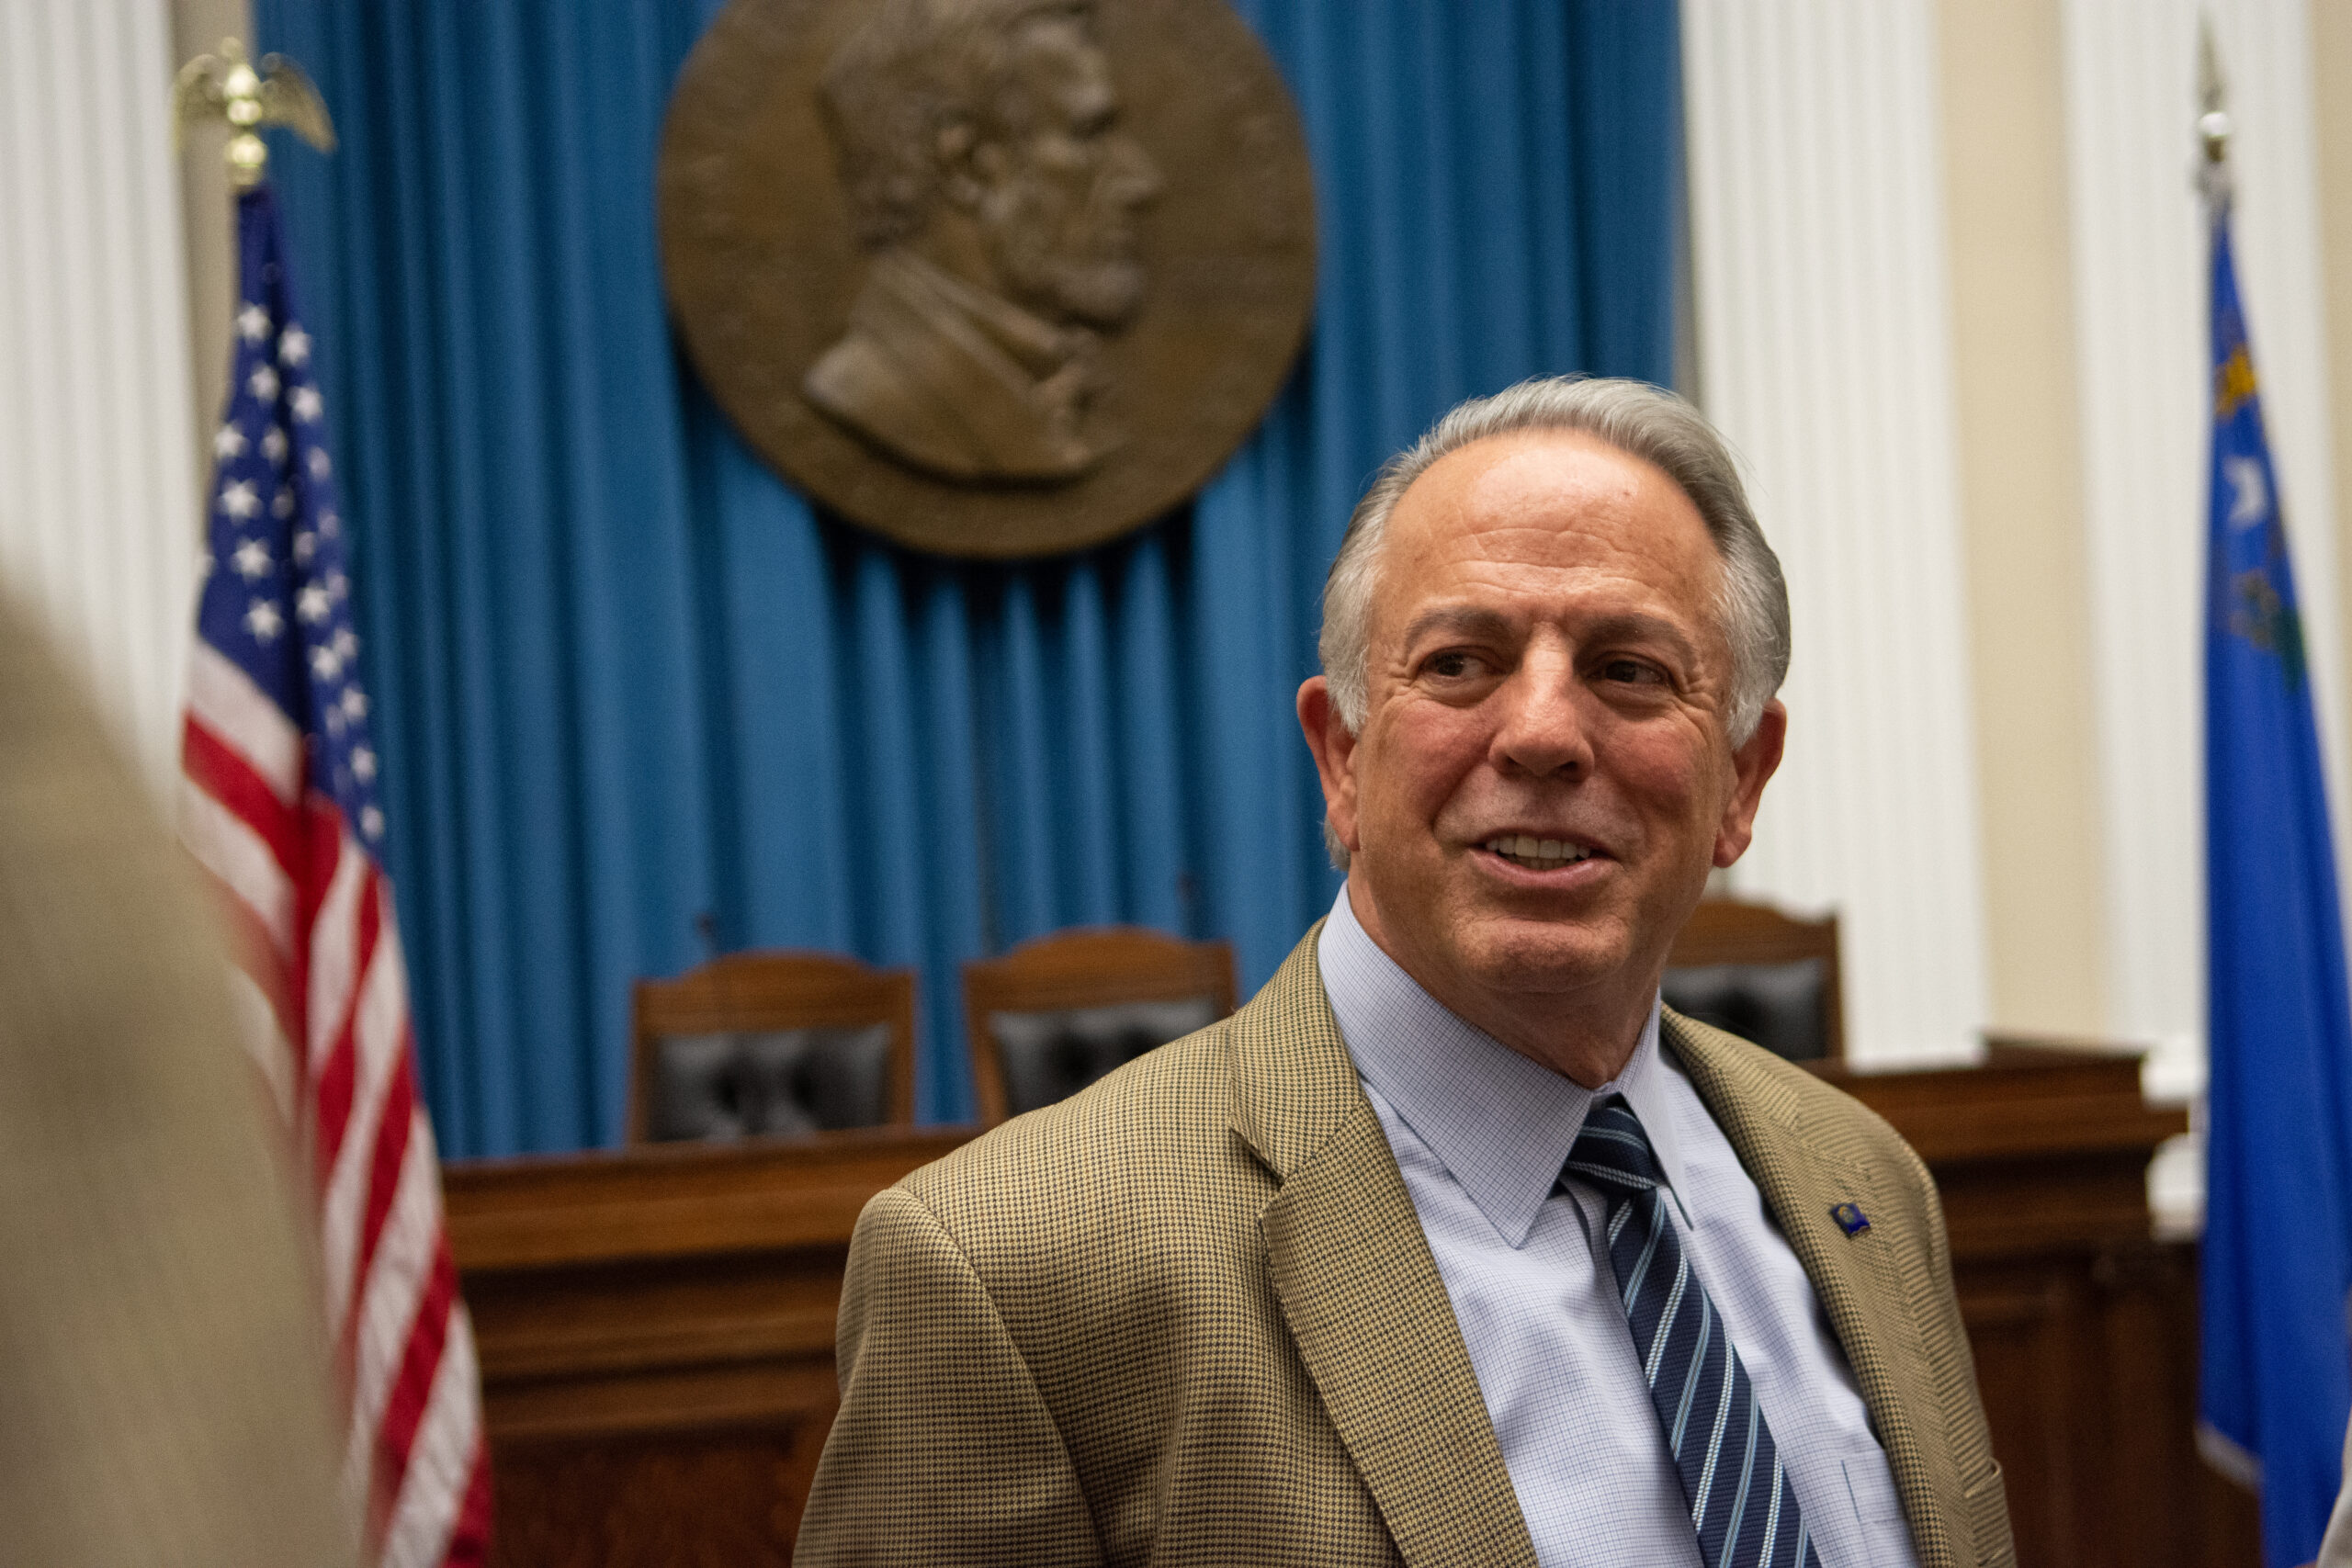 Gov. Joe Lombardo following a bill signing ceremony inside the Capitol in Carson City on May 31, 2023. (David Calvert/The Nevada Independent).